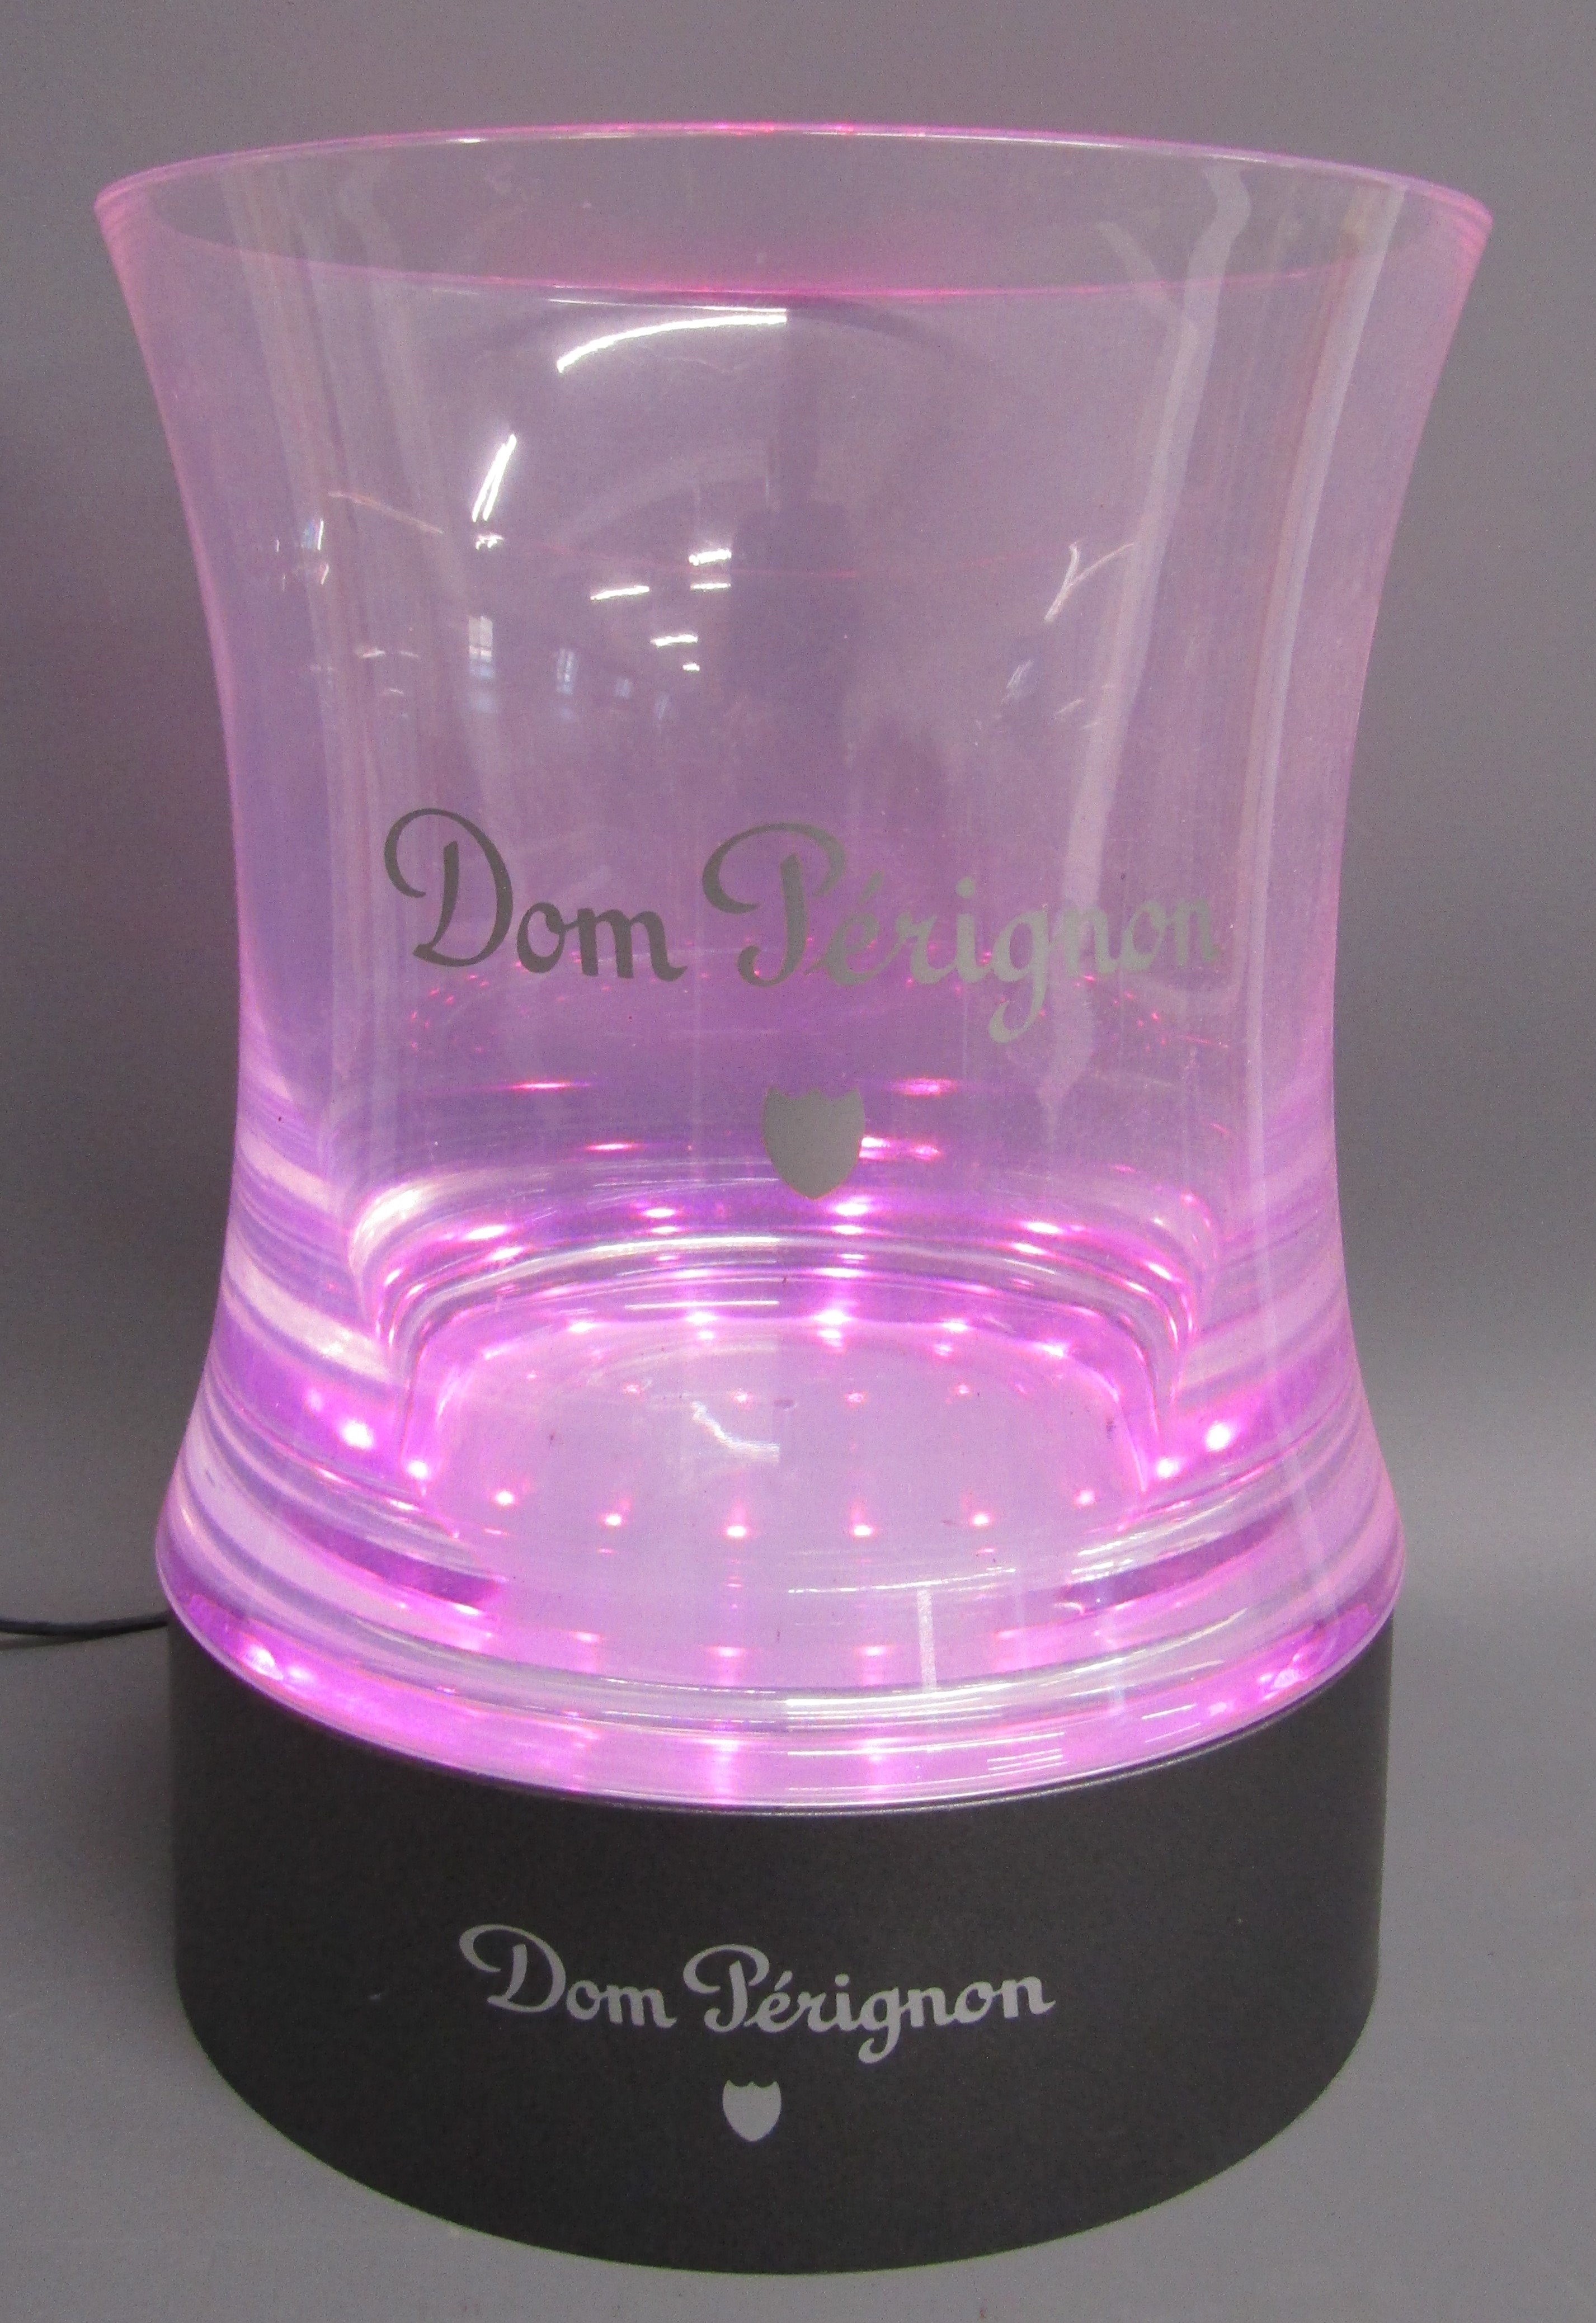 Dom Perignon acrylic ice bucket with Andy Warhol colour changing light up base - Image 3 of 5